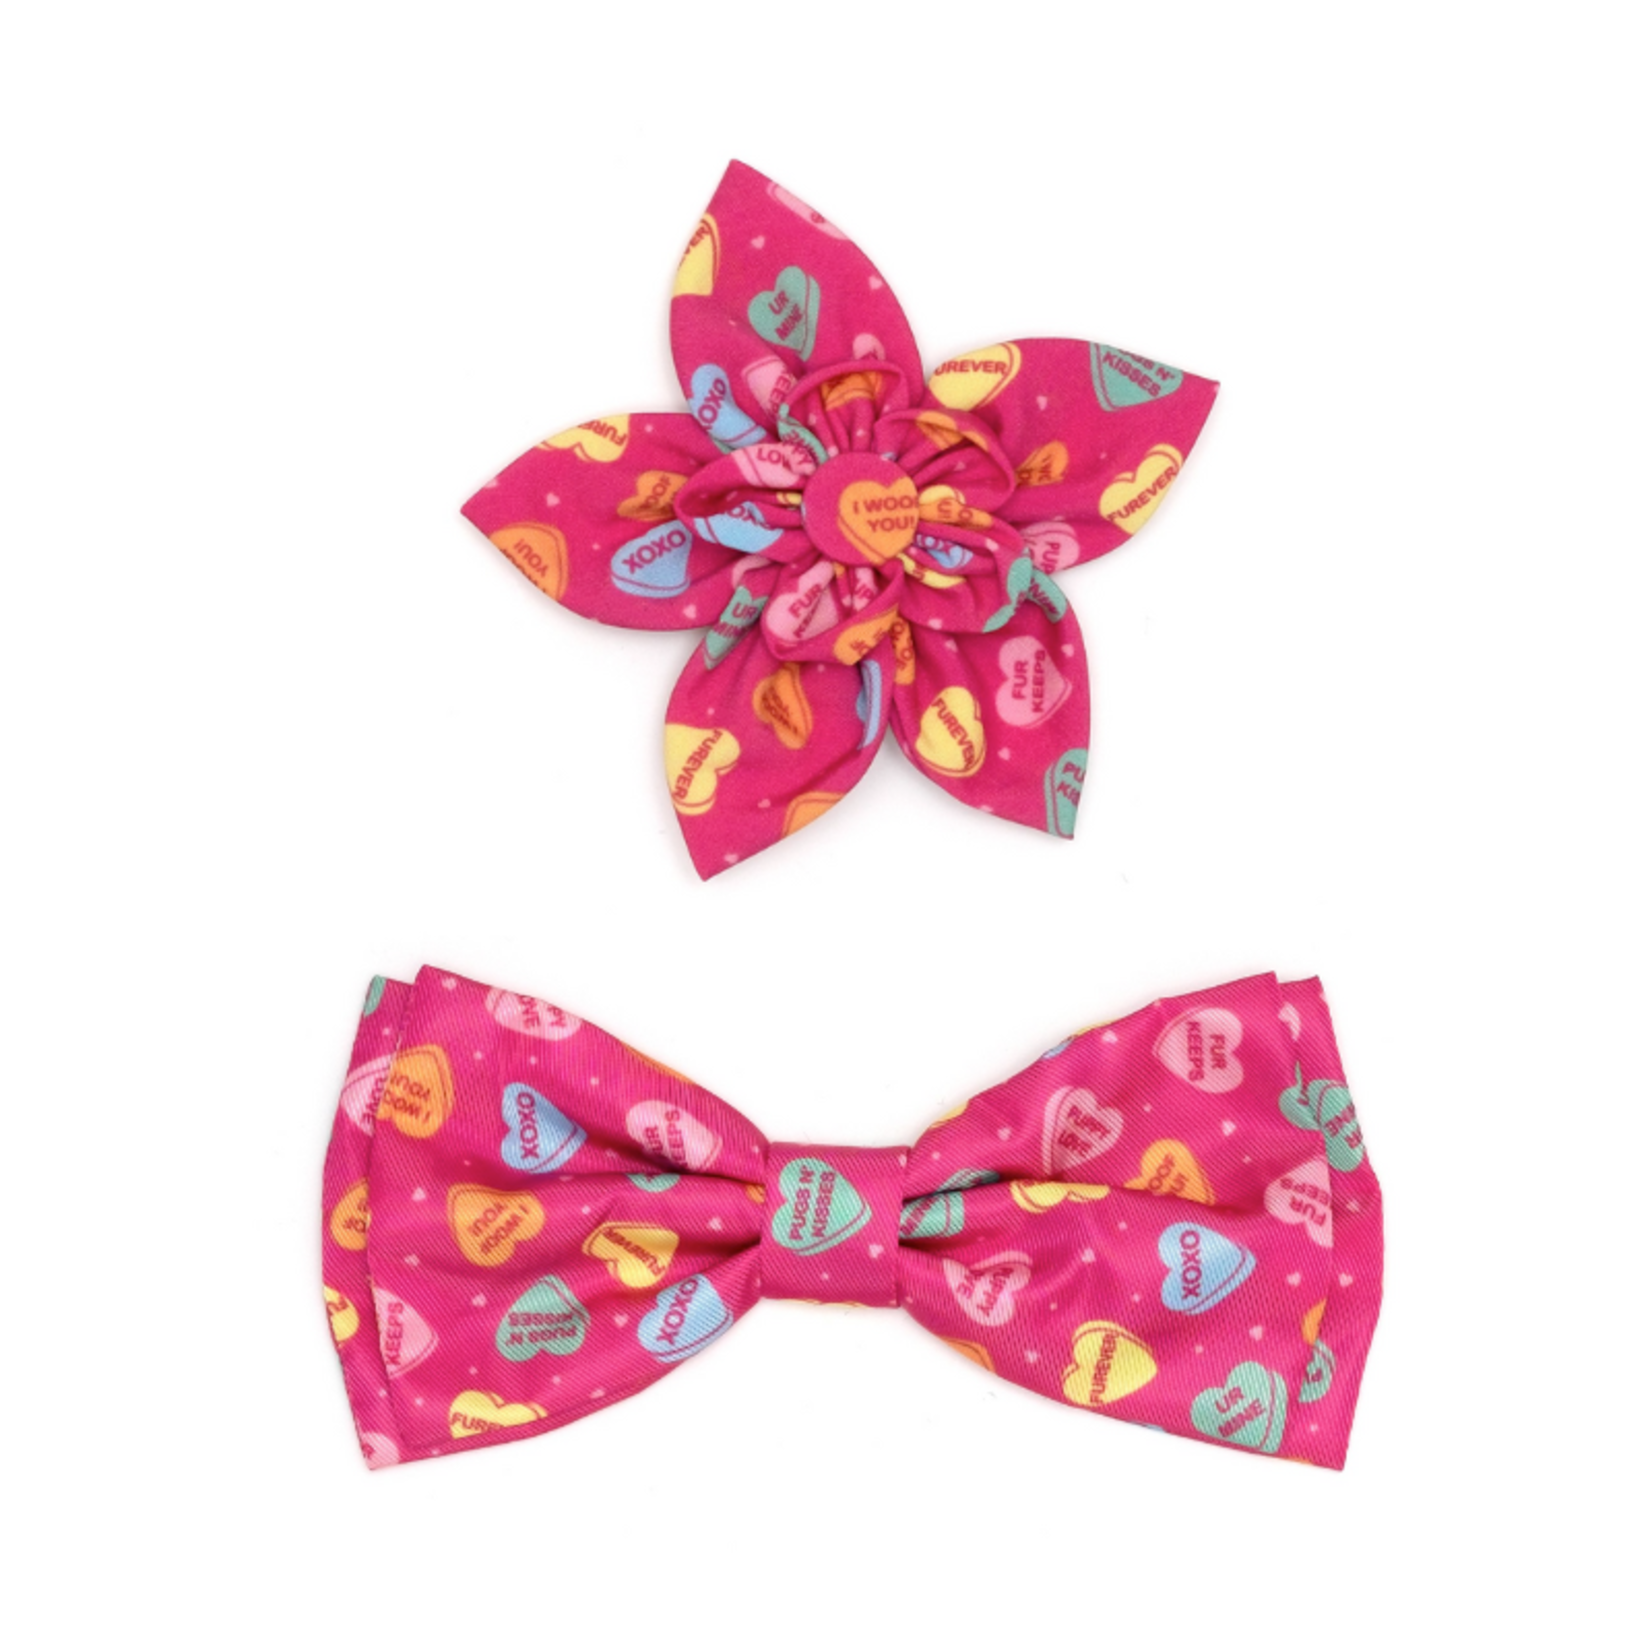 The Worthy Dog Puppy Love / Candy Hearts - Bow Tie / Collar Flower - The Worthy Dog